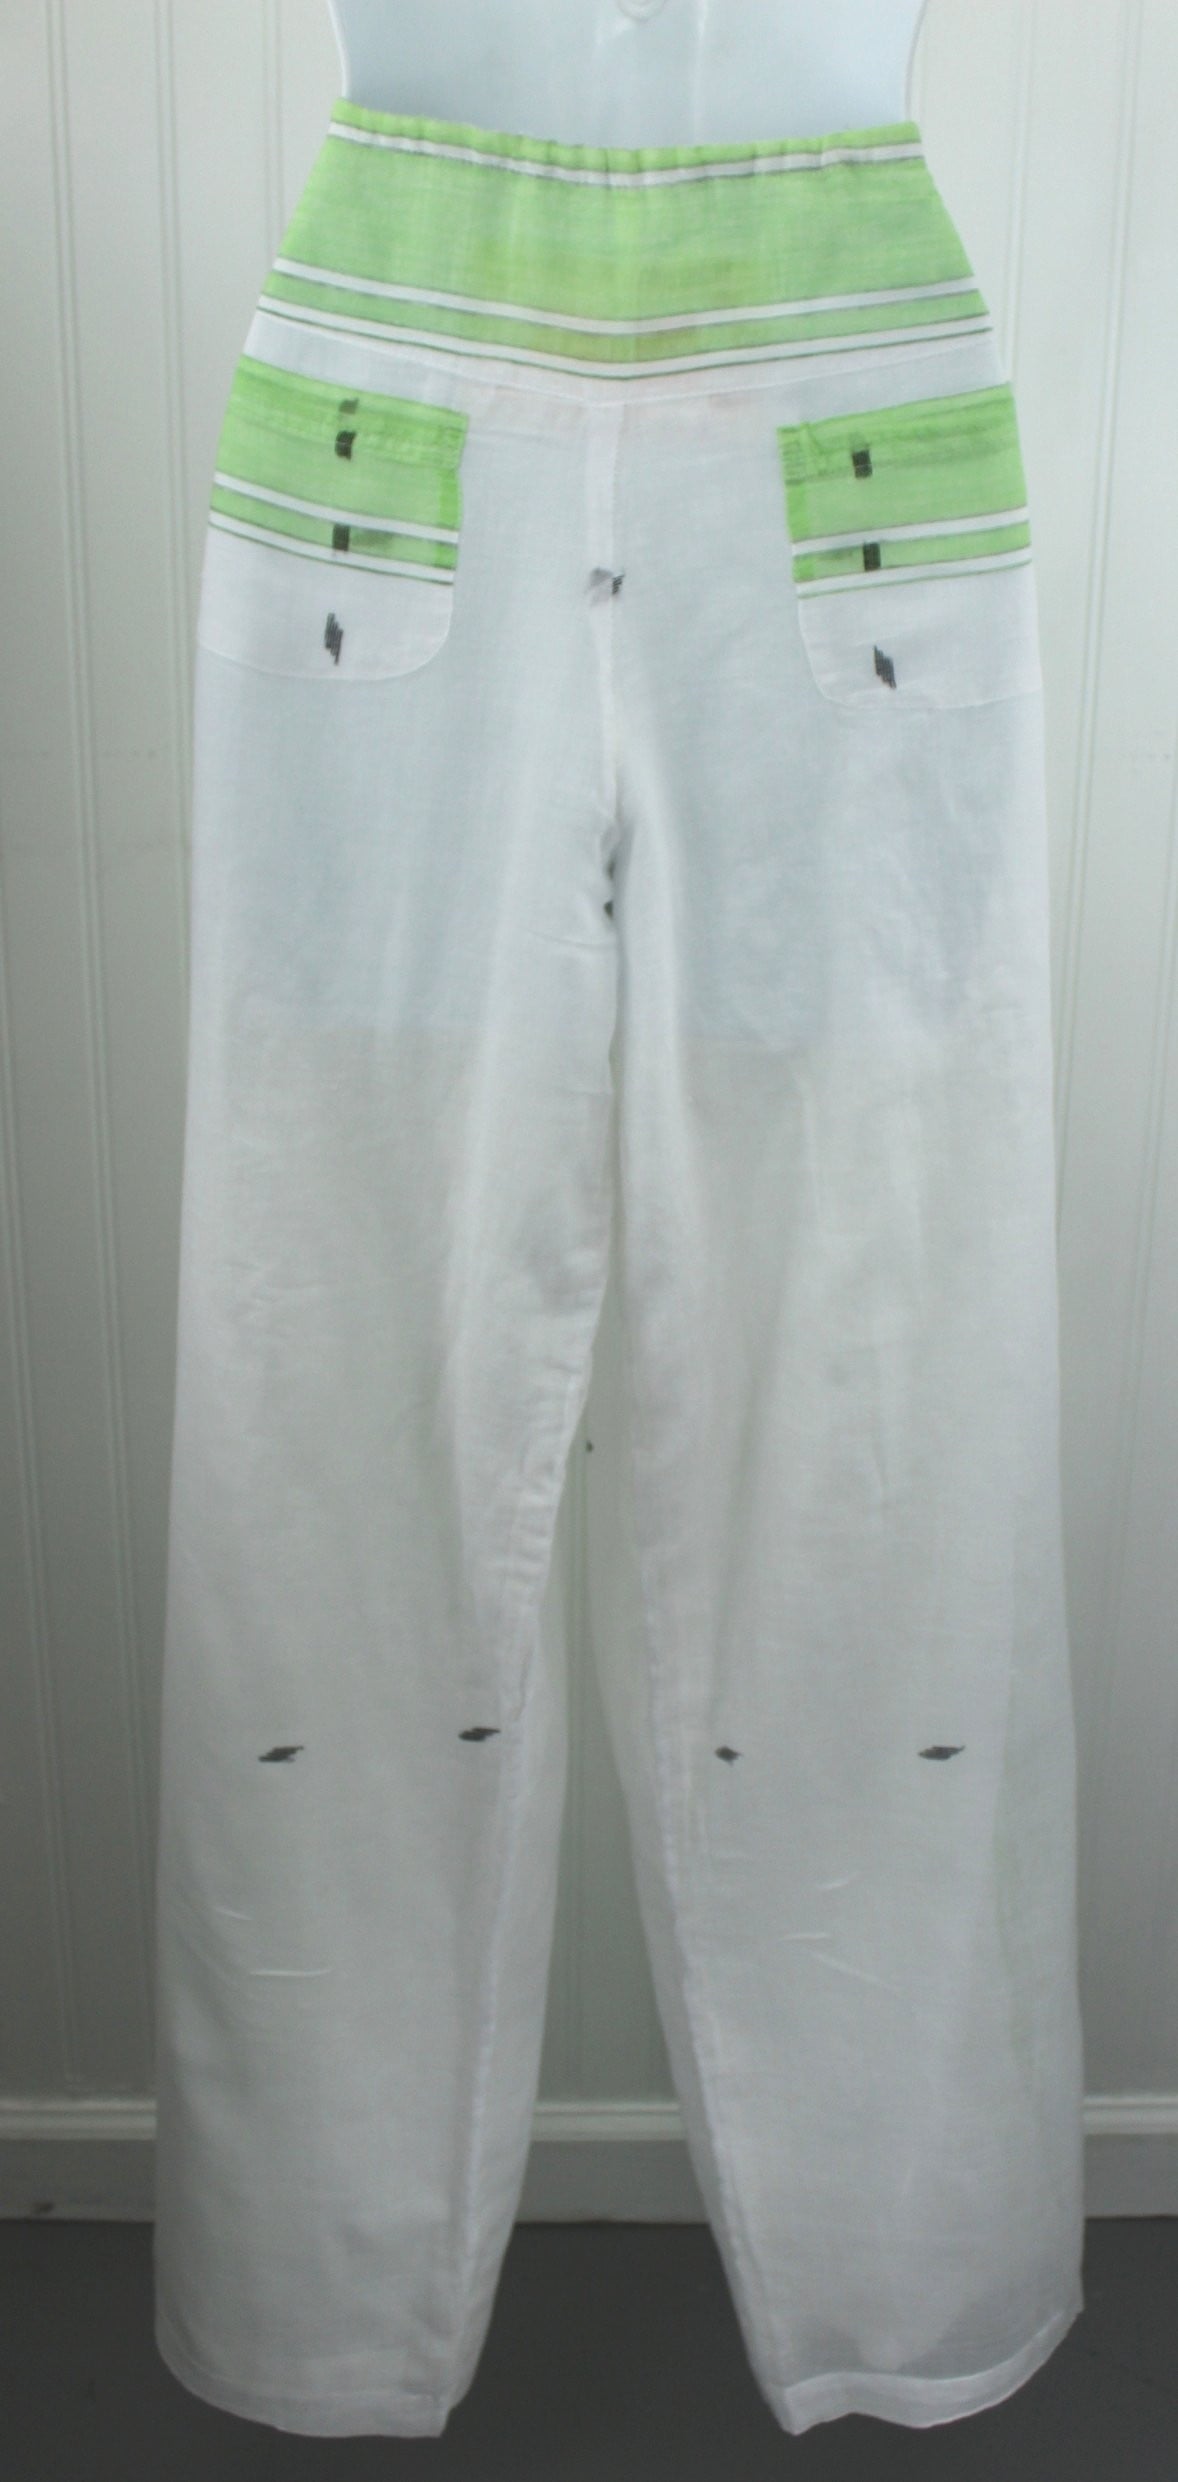 Paul Ropp Drawstring Pants Fully Lined Sheer 100% Light Cotton Size 14 great design comfy pants